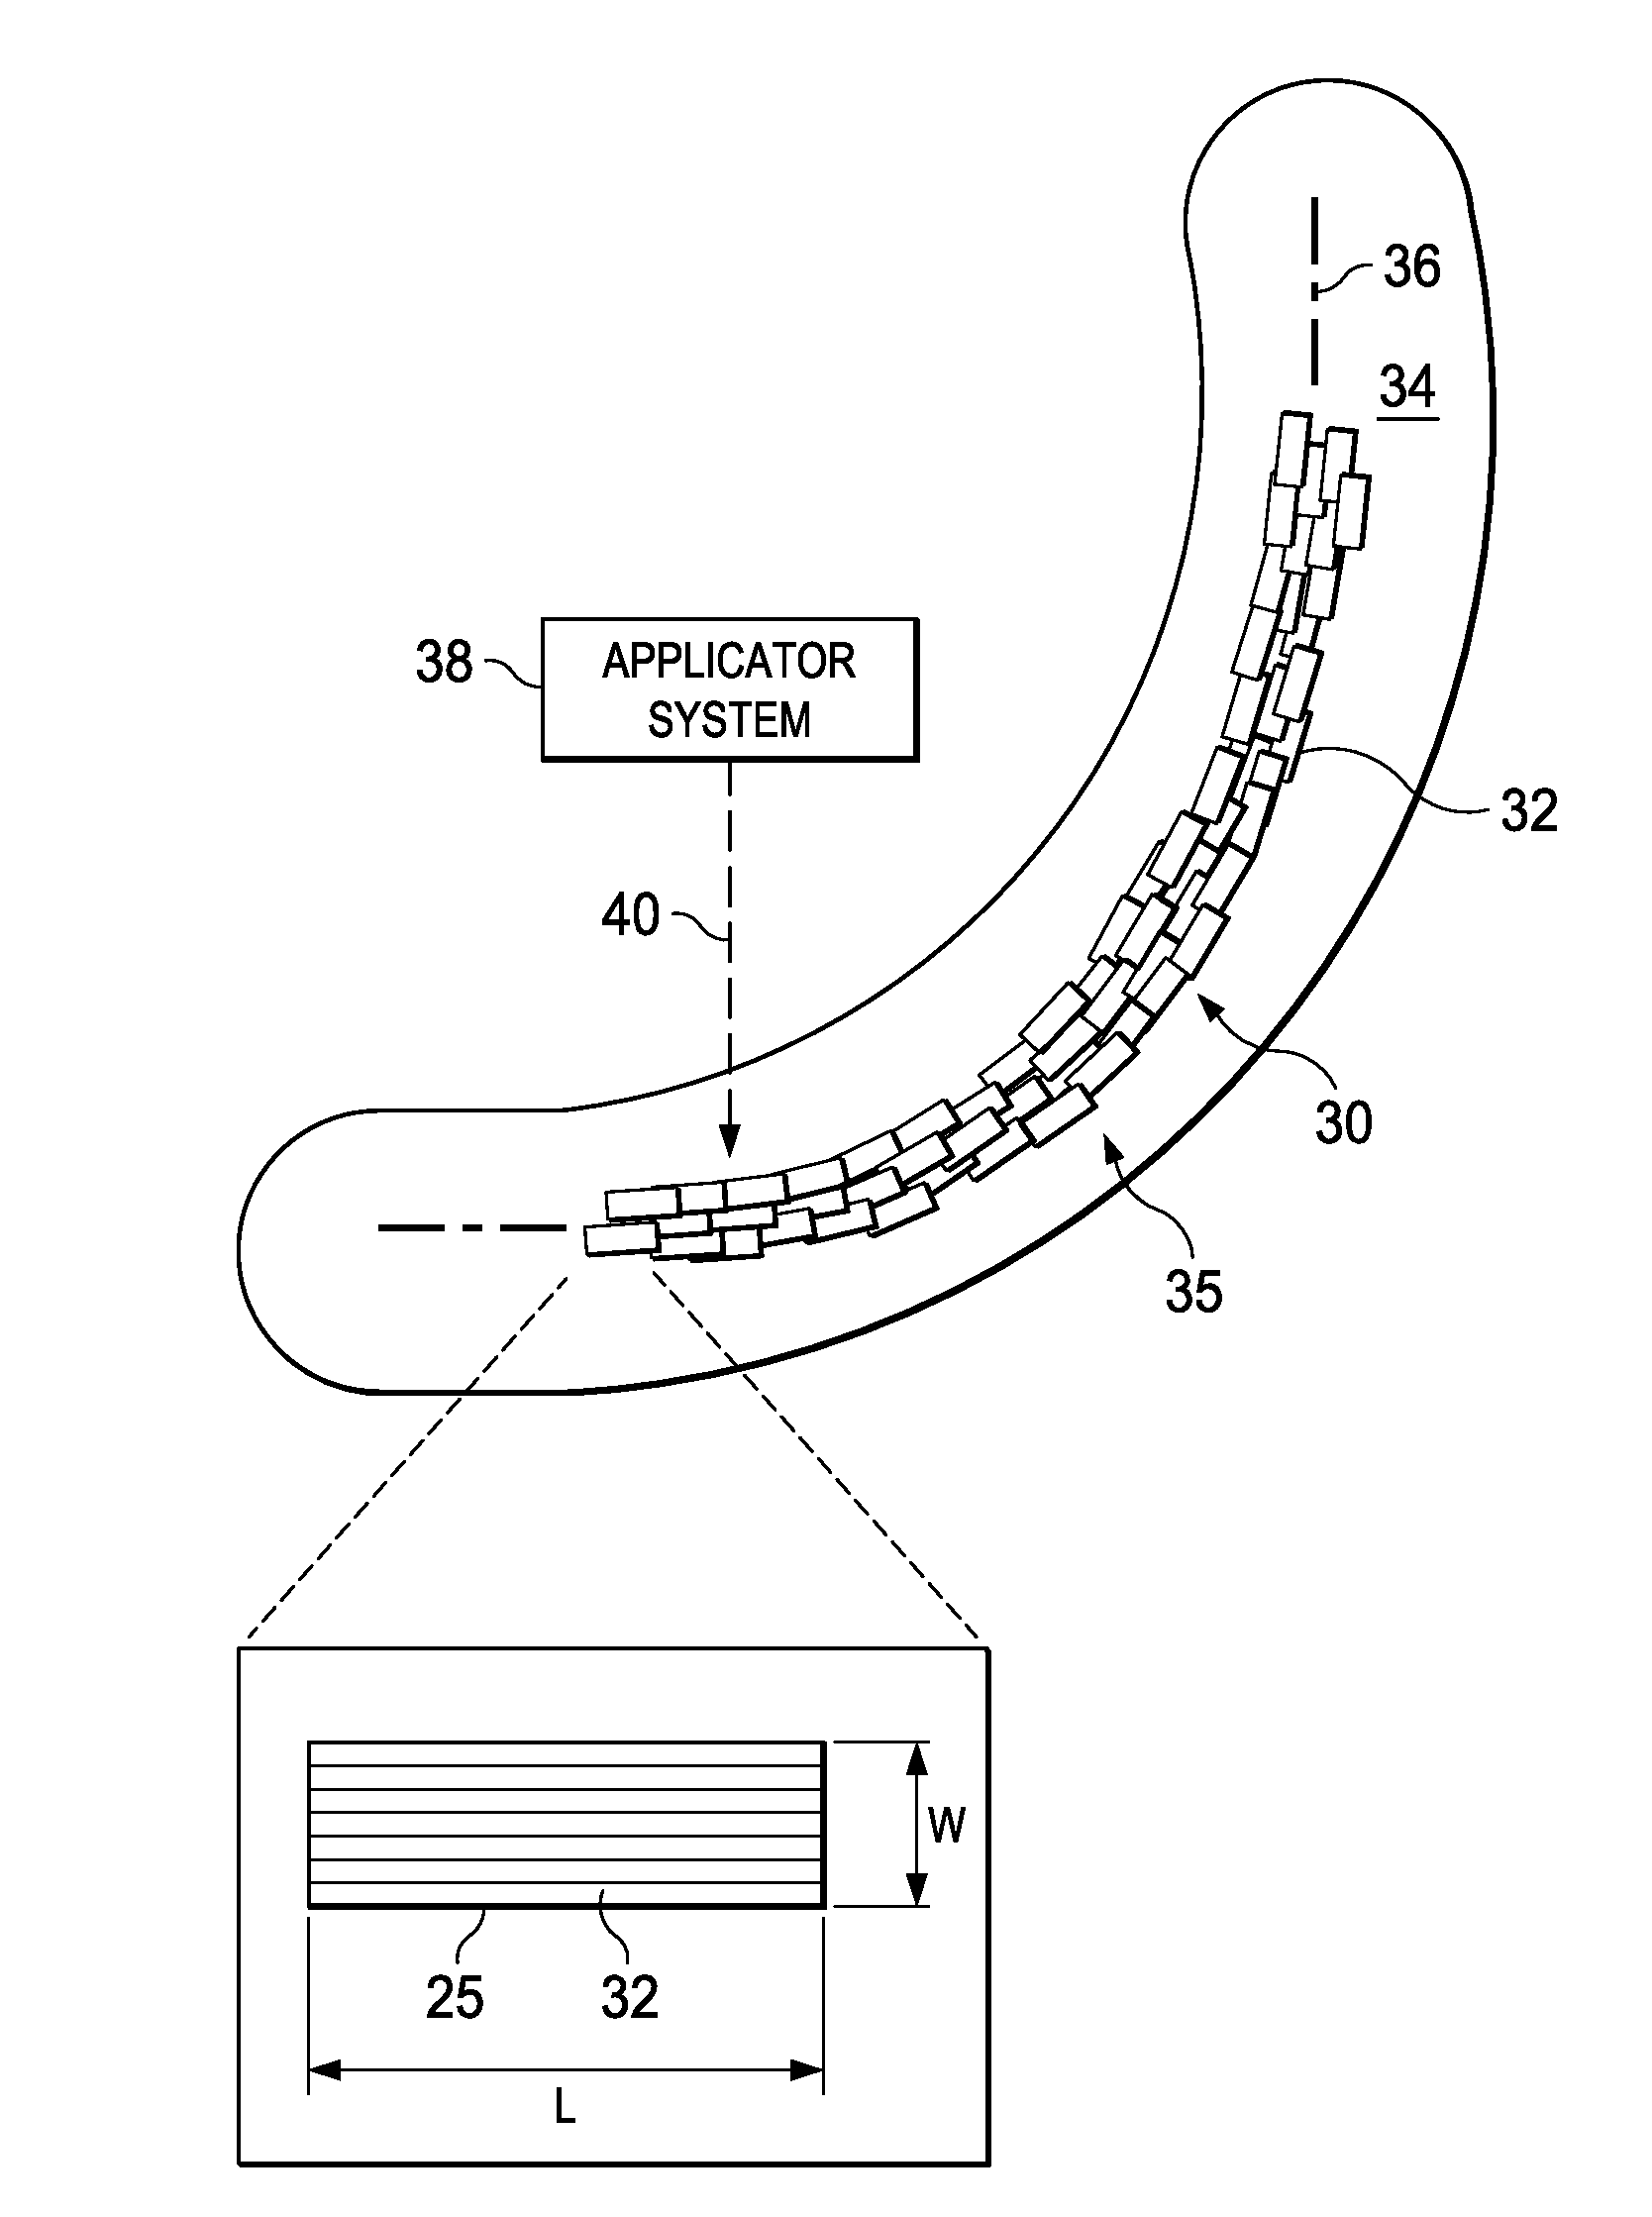 Forming Composite Features Using Steered Discontinuous Fiber Pre-Preg